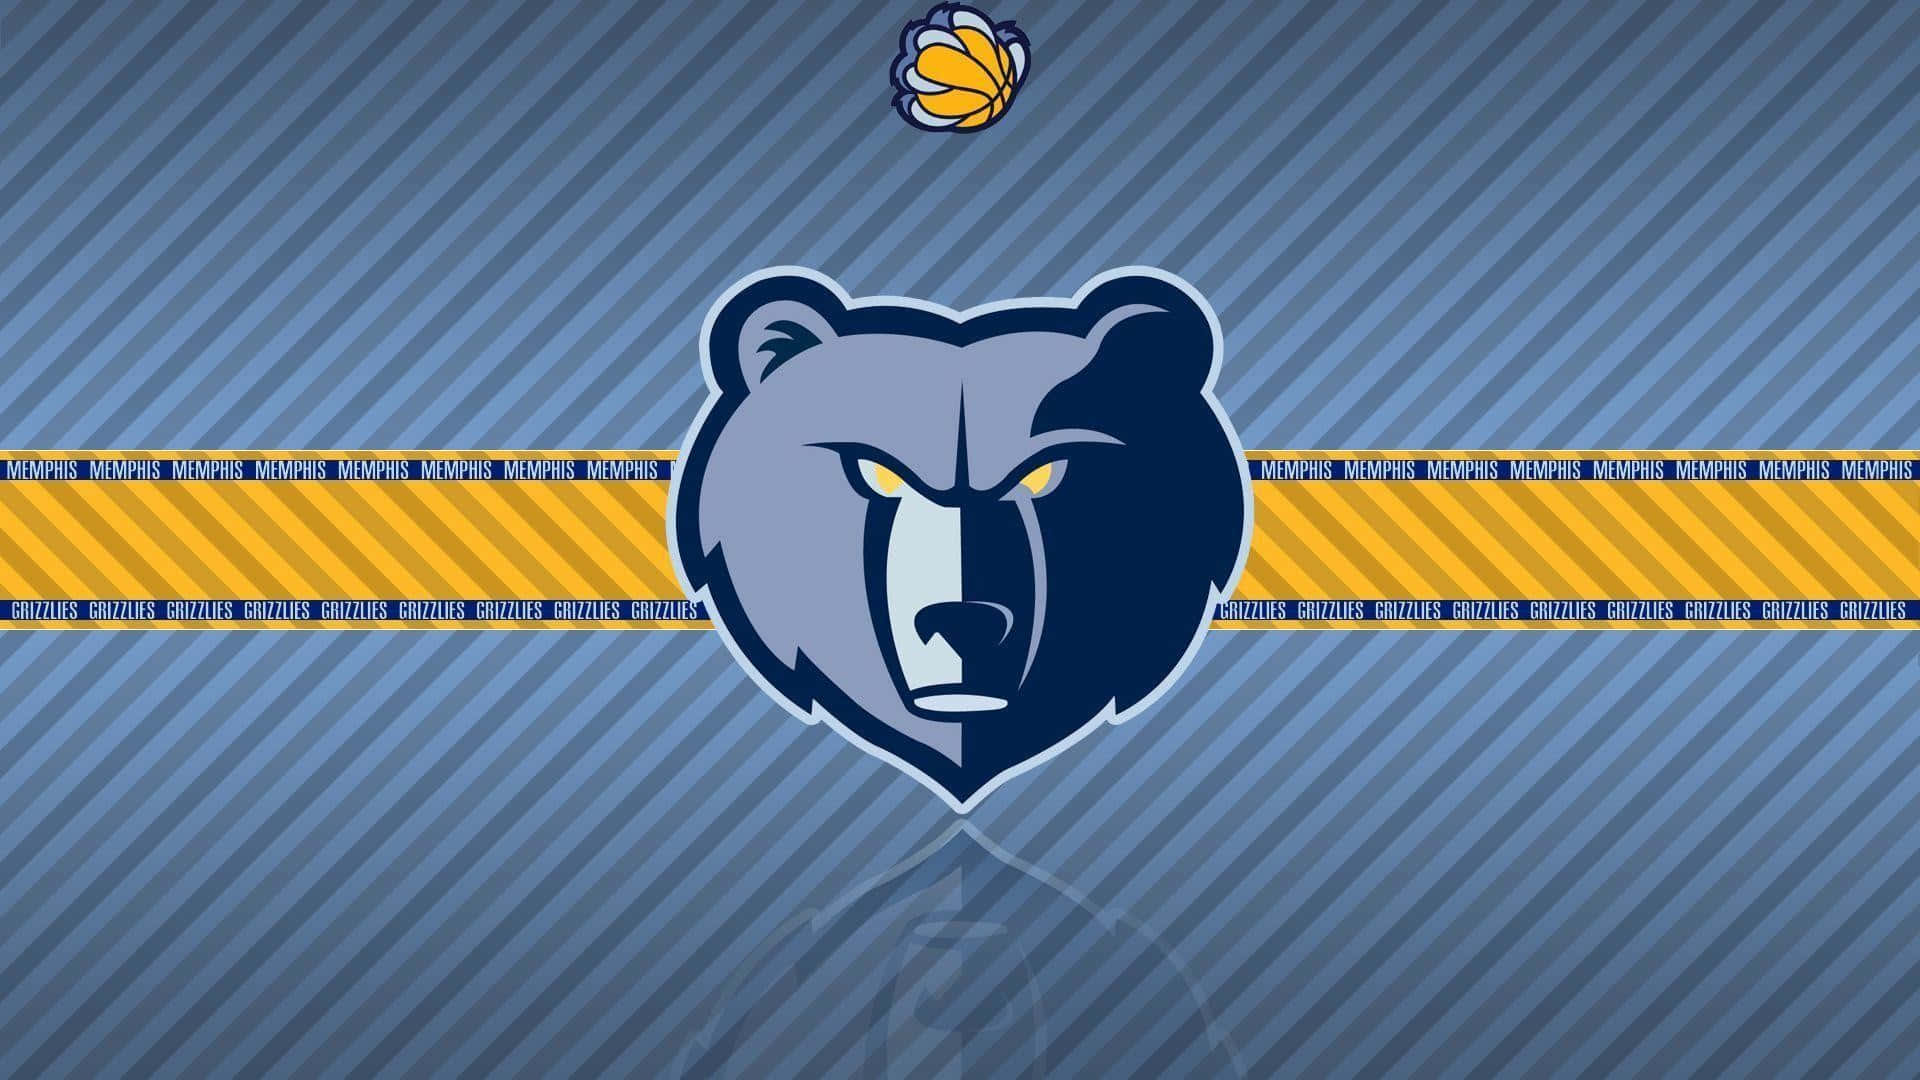 Show your team spirit with the official NBA Team Logos! Wallpaper